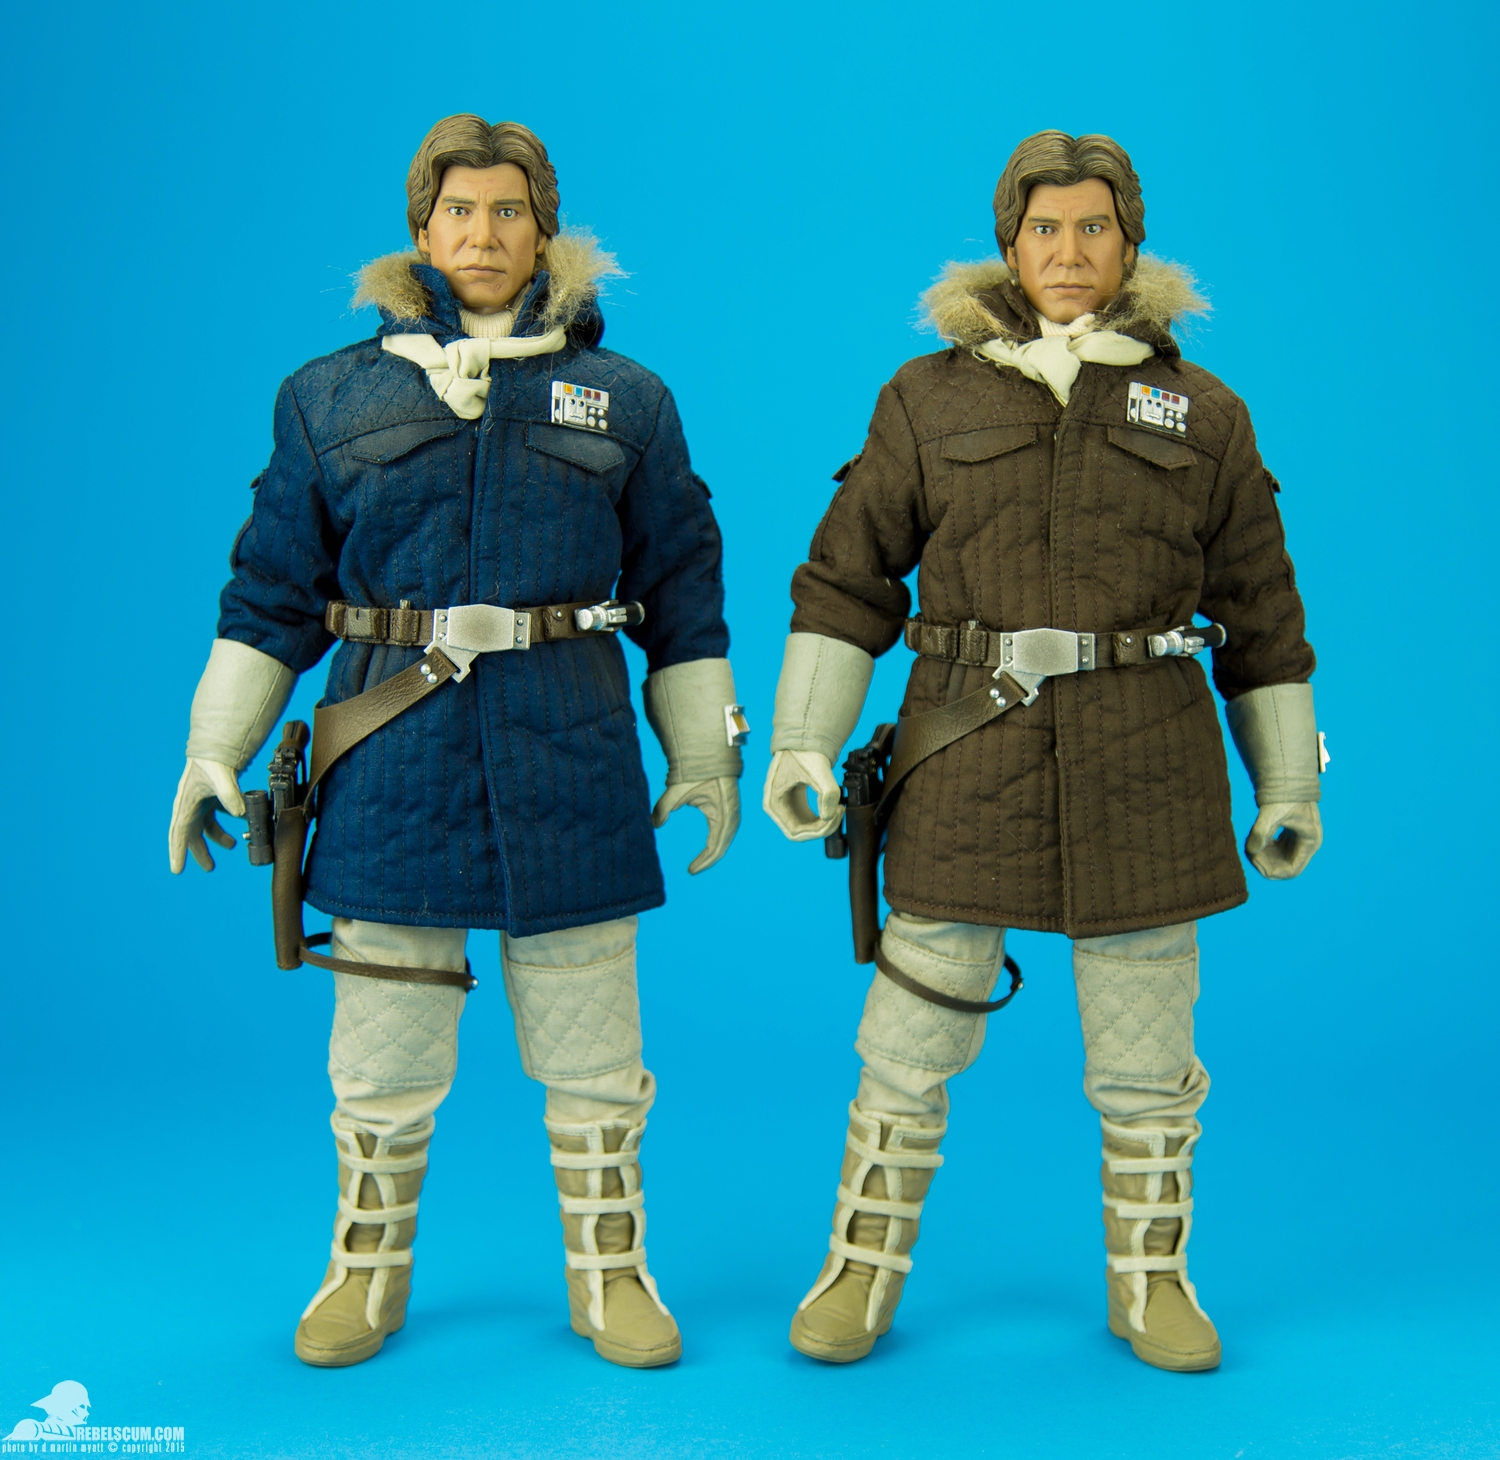 Han-Solo-Hoth-Blue-Sixth-Scale-Sideshow-Collectibles-Star-Wars-021.jpg